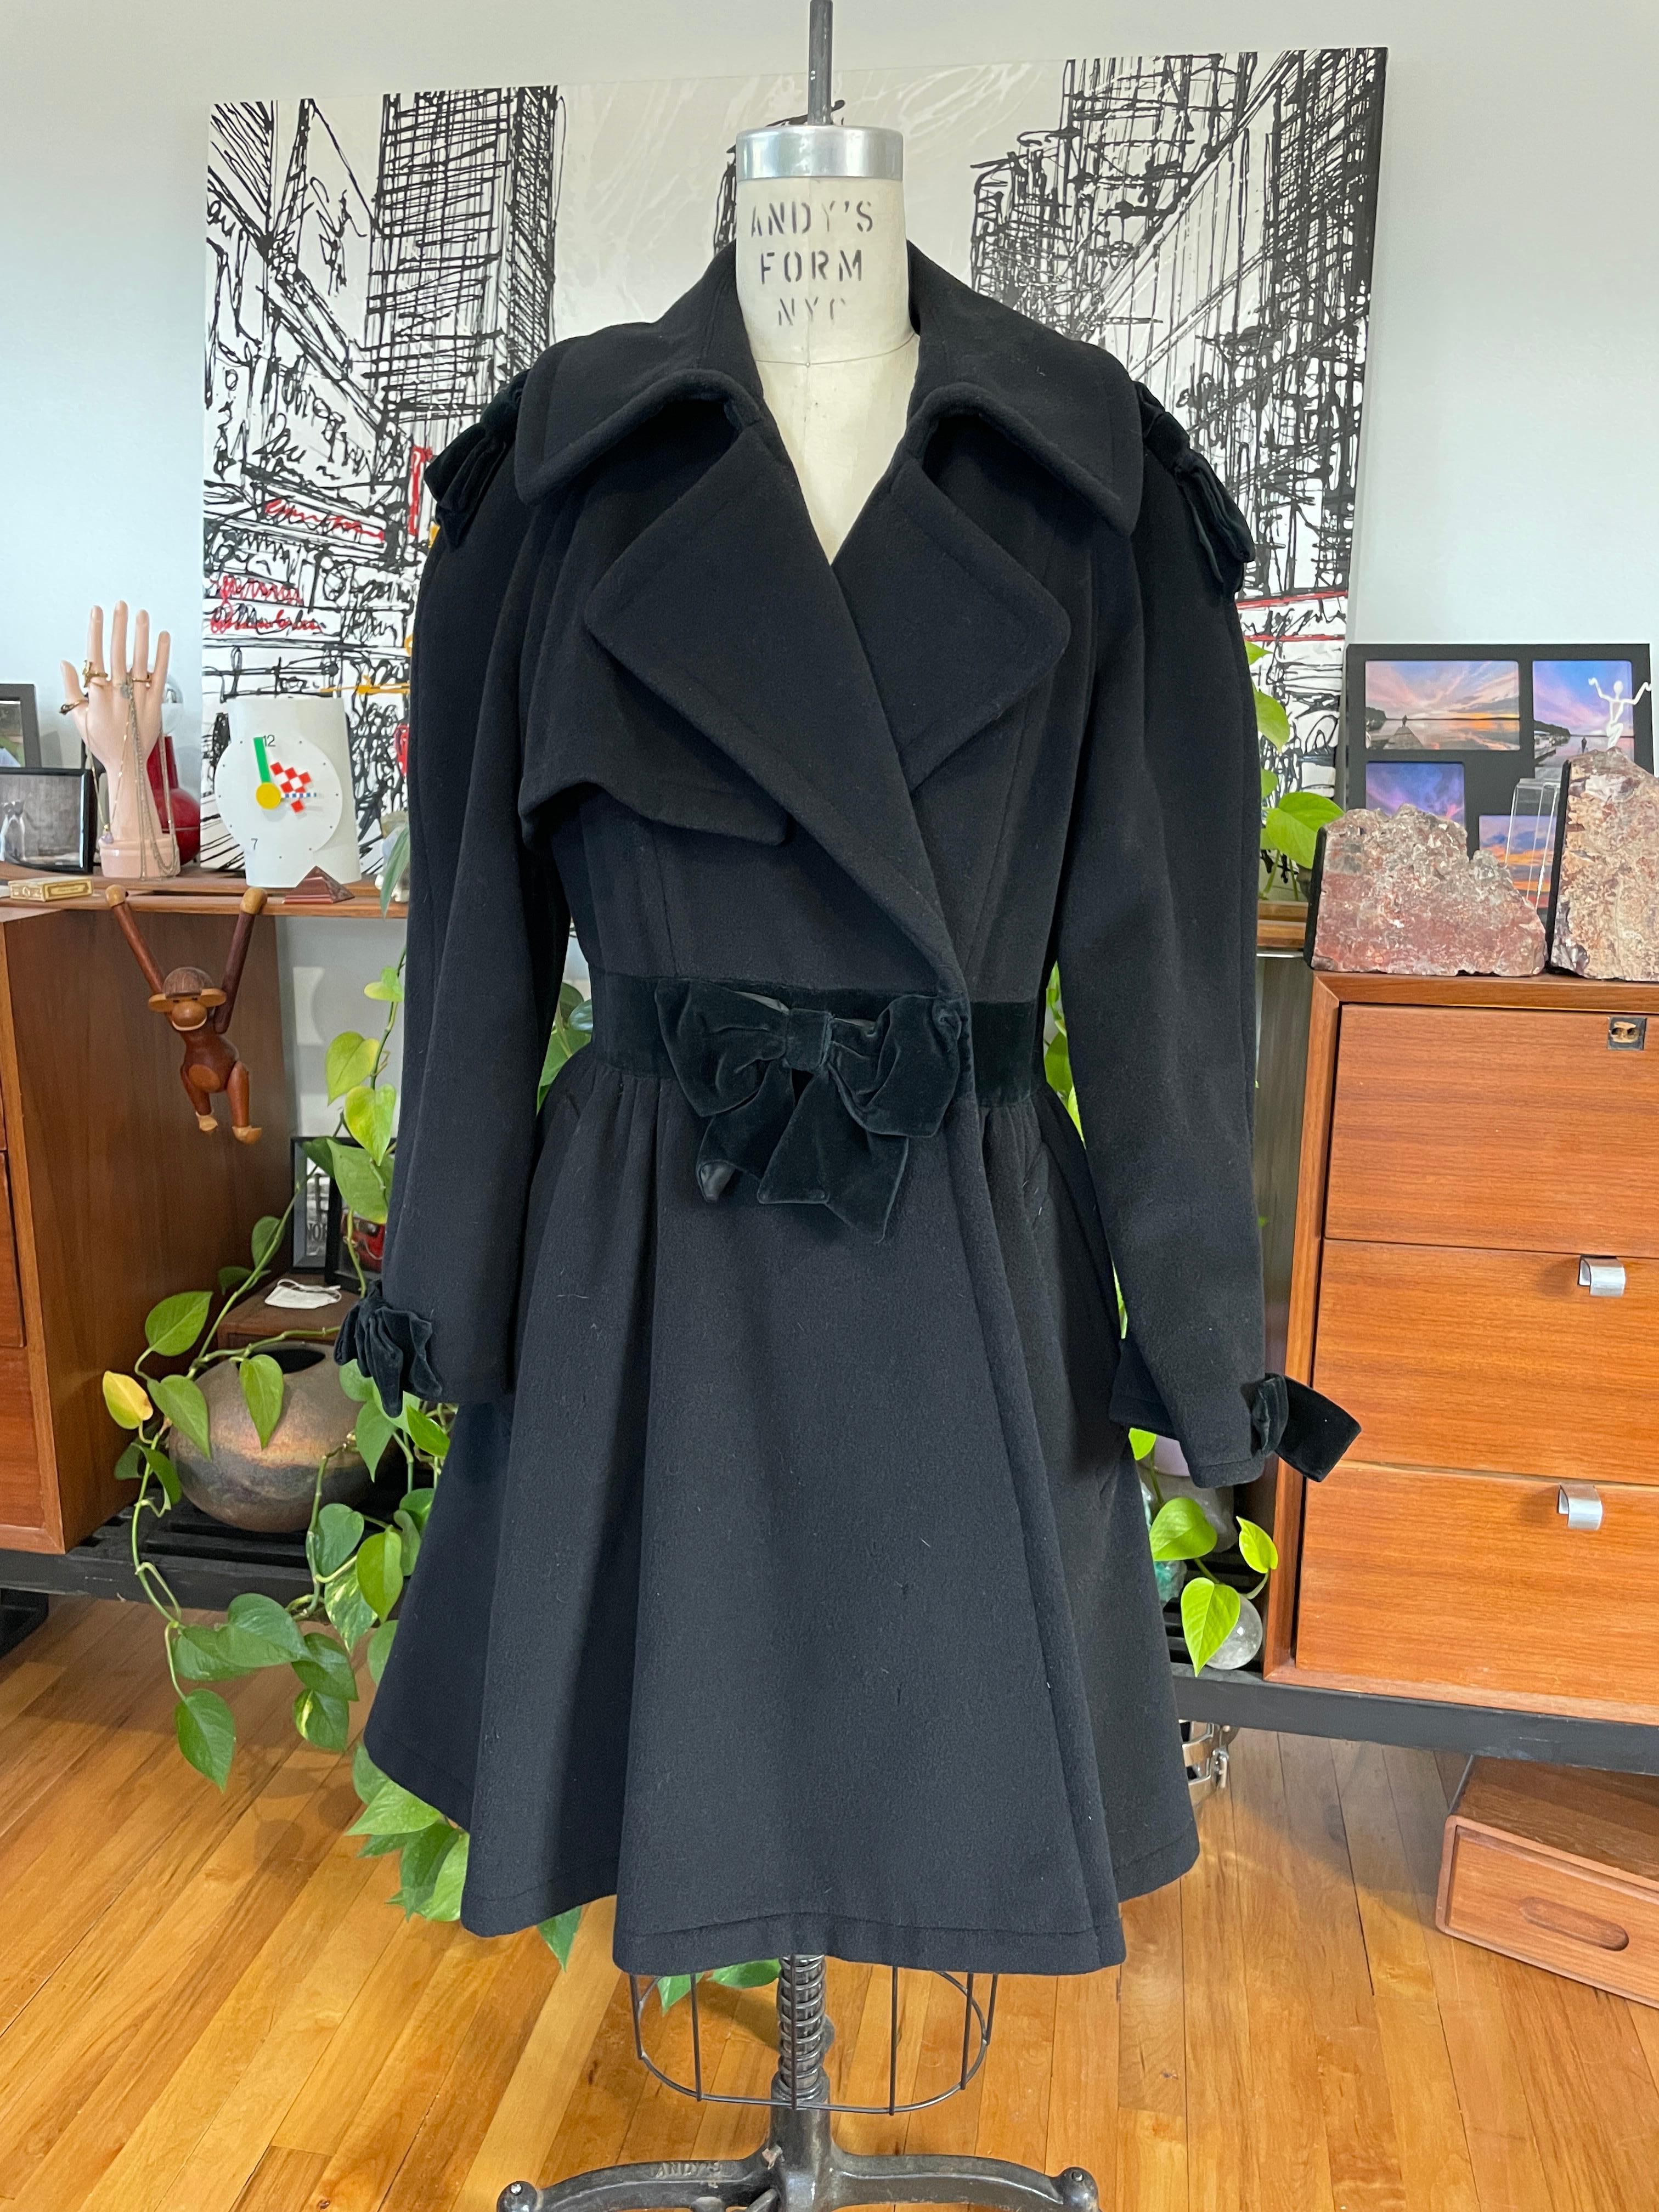 Moschino Cheap & Chic Wool Coat Bows Jacket Double Breasted  In Excellent Condition For Sale In Wallkill, NY